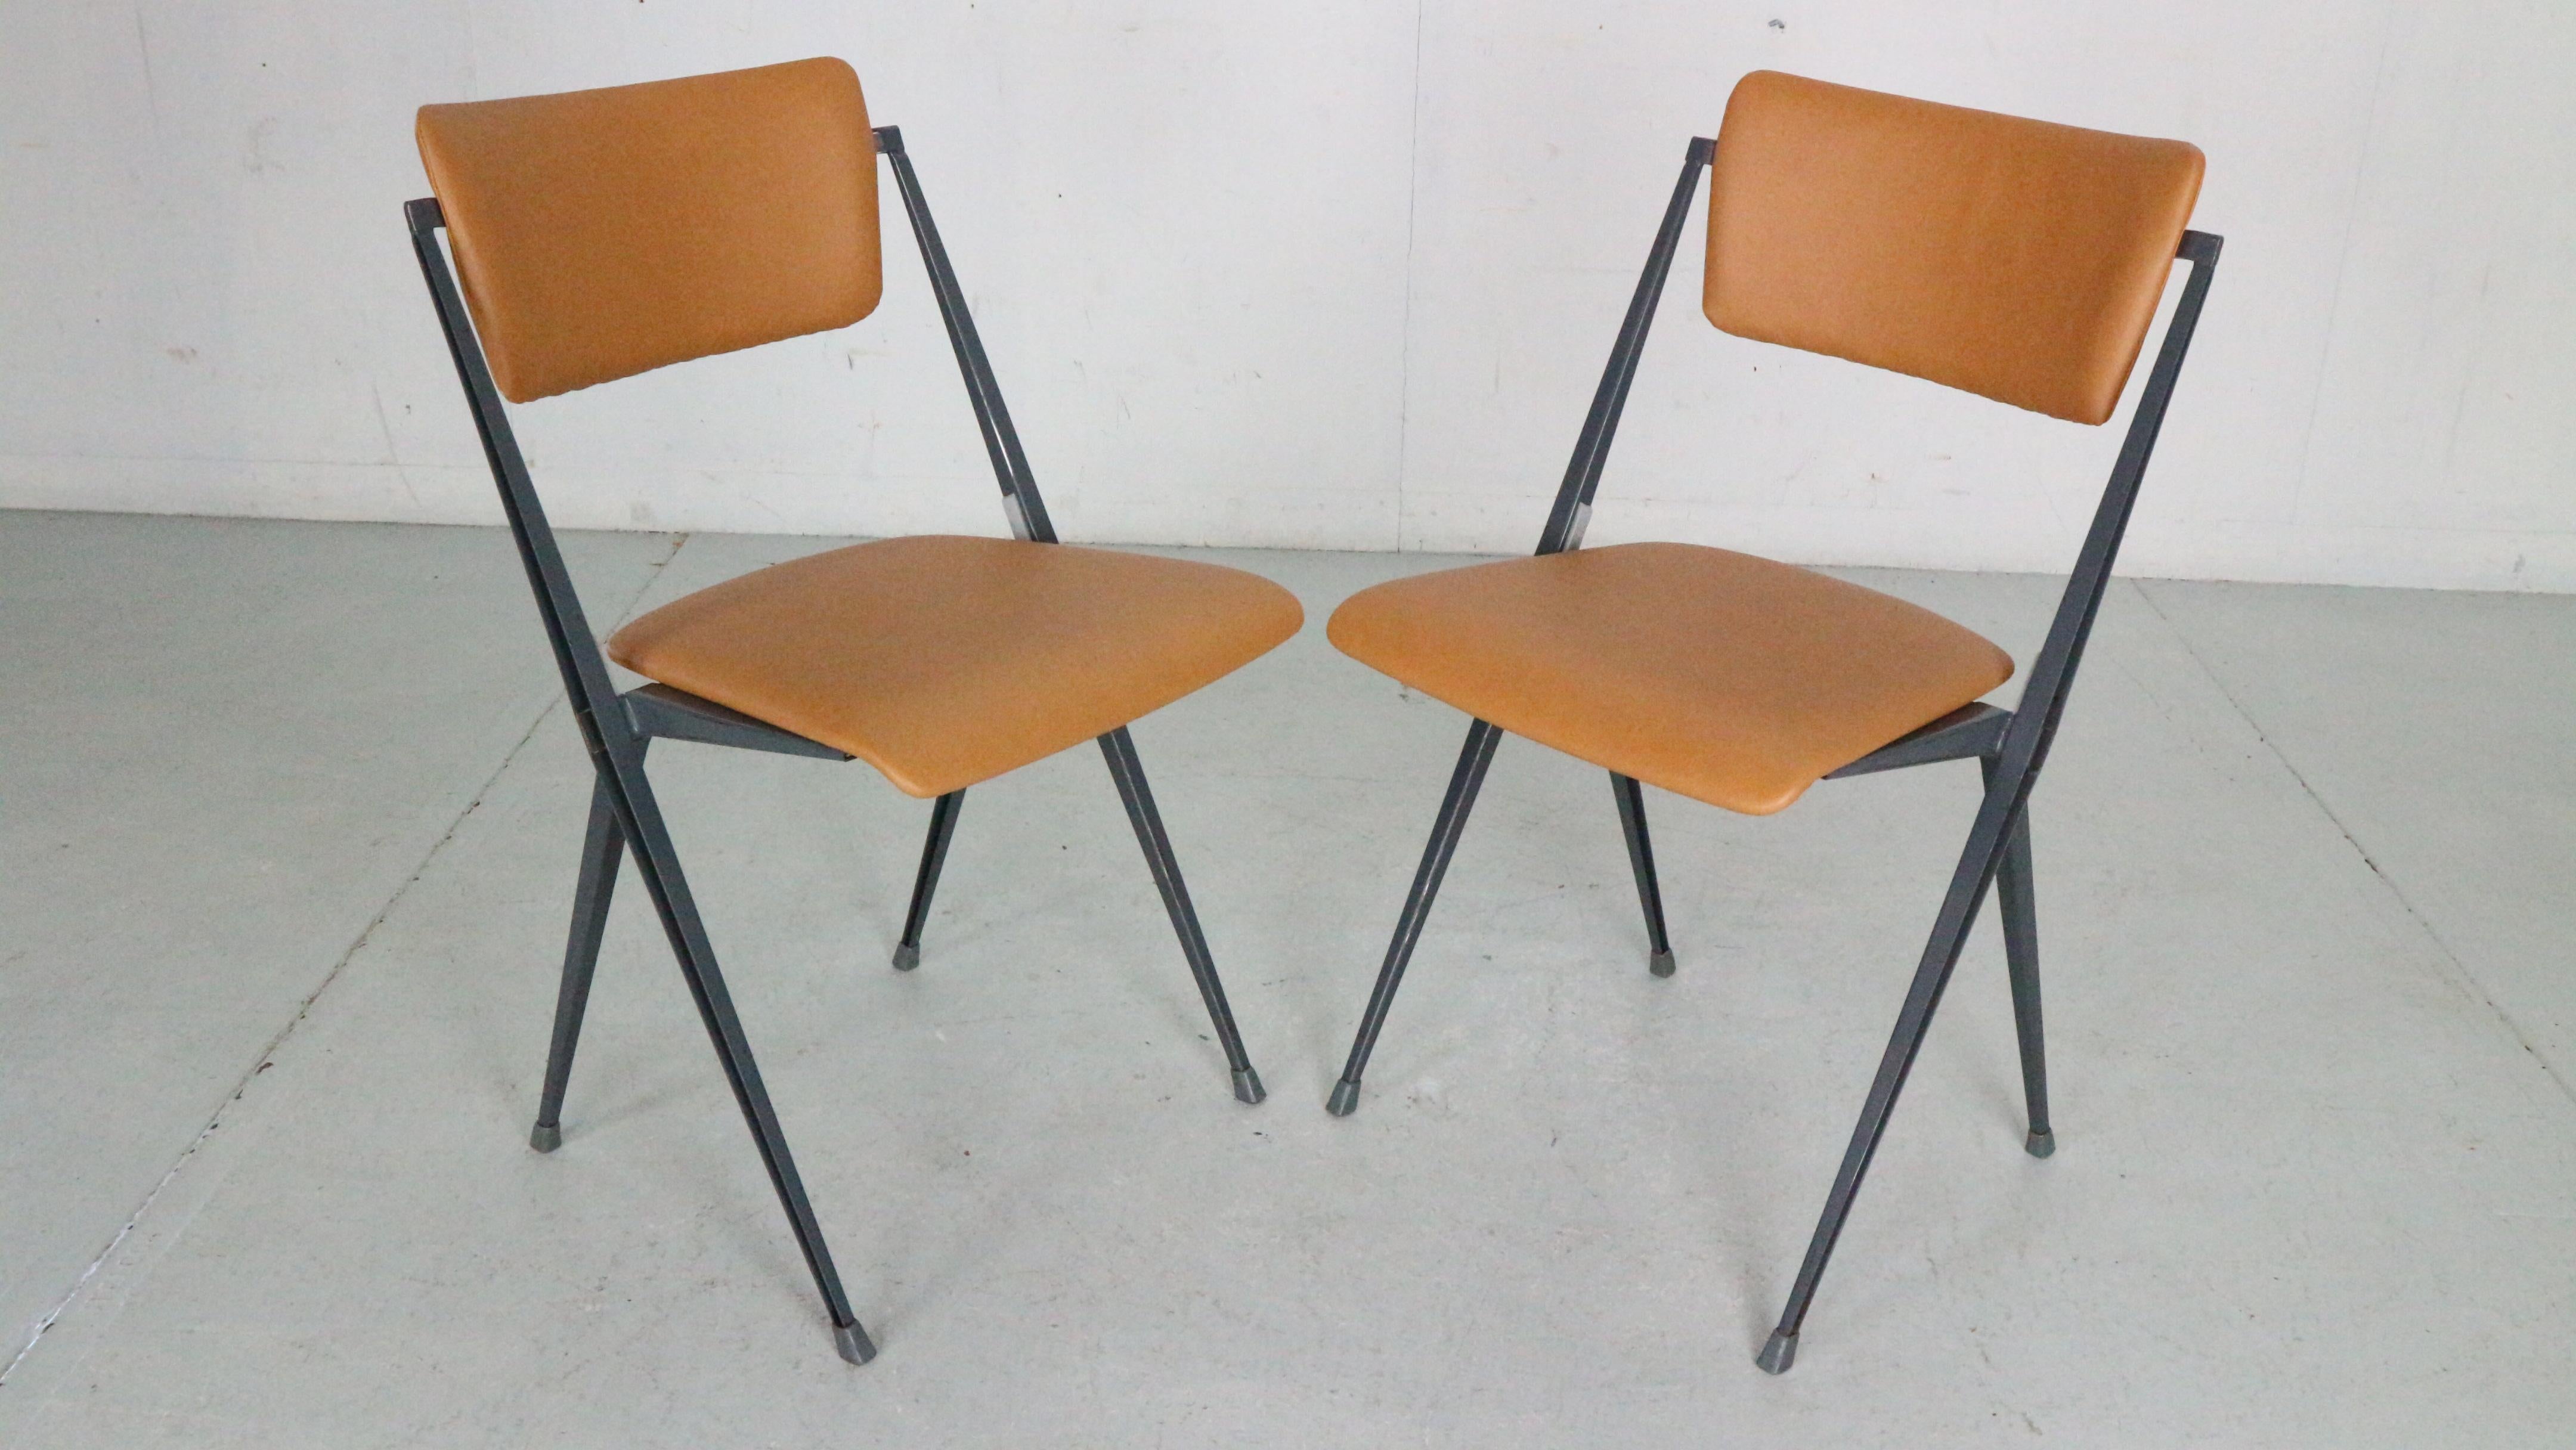 Wim Rietveld Set Of 4 Pyramide Chairs For De Cirkel, 1966 Netherlands For Sale 4